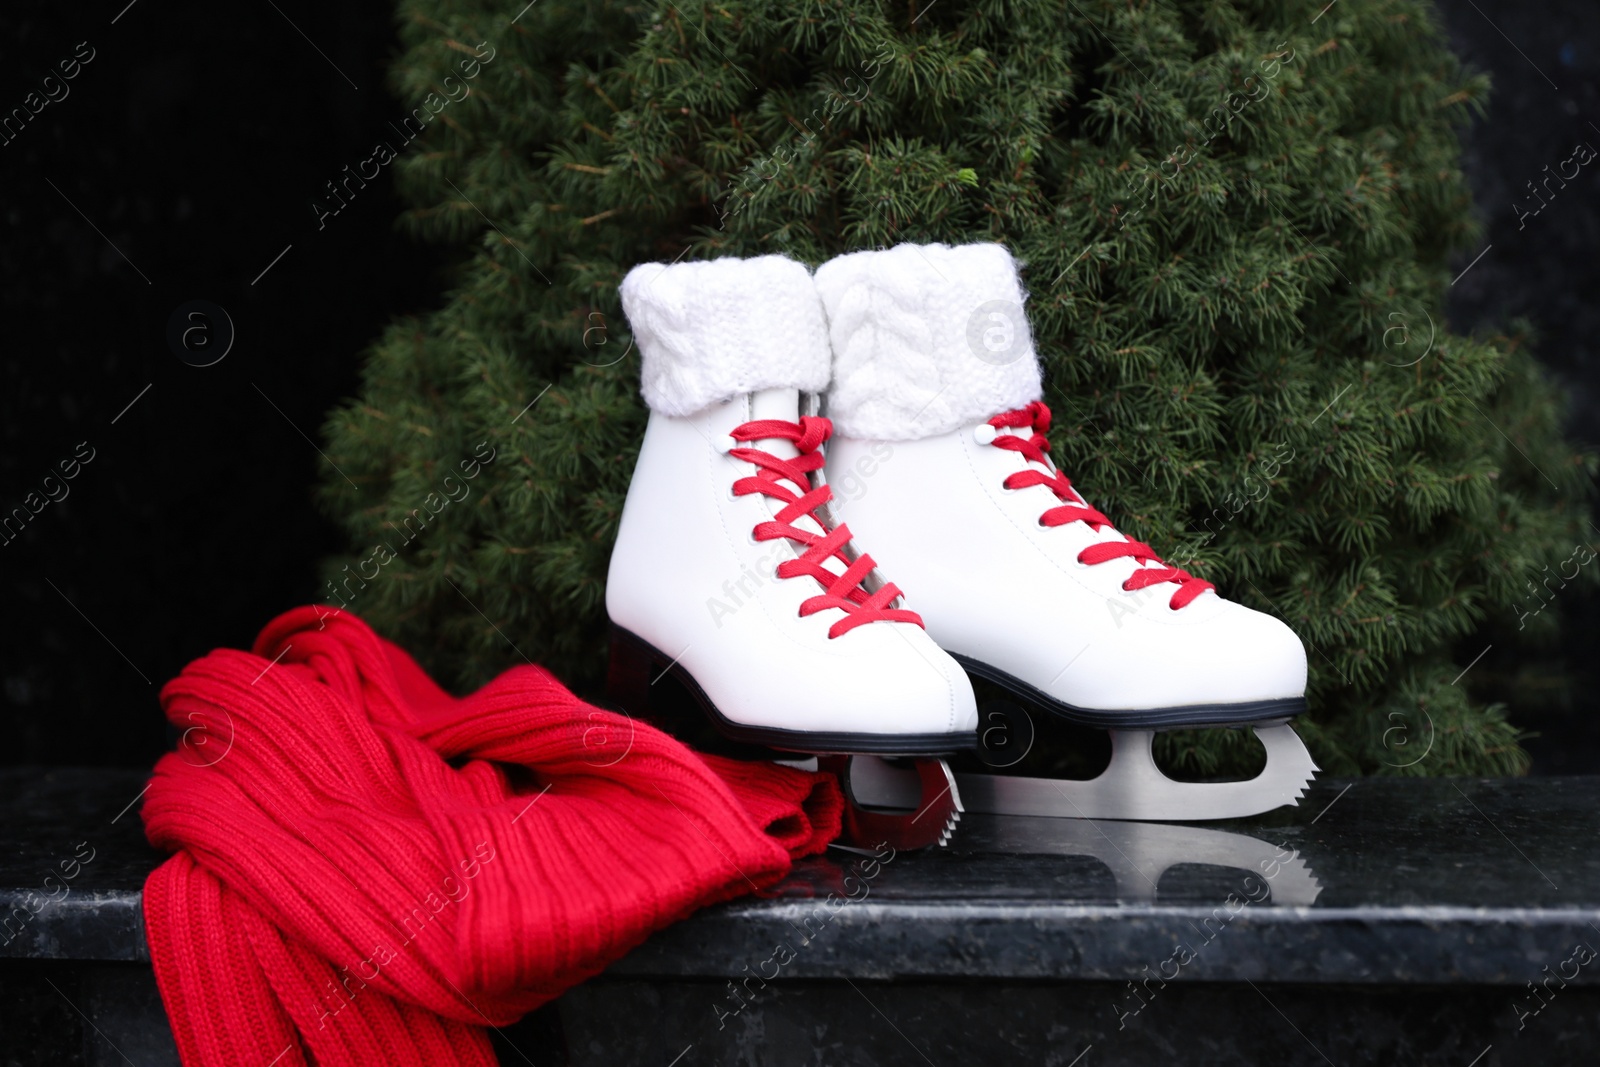 Photo of Red knitted scarf and pair of ice skates on stone step outdoors